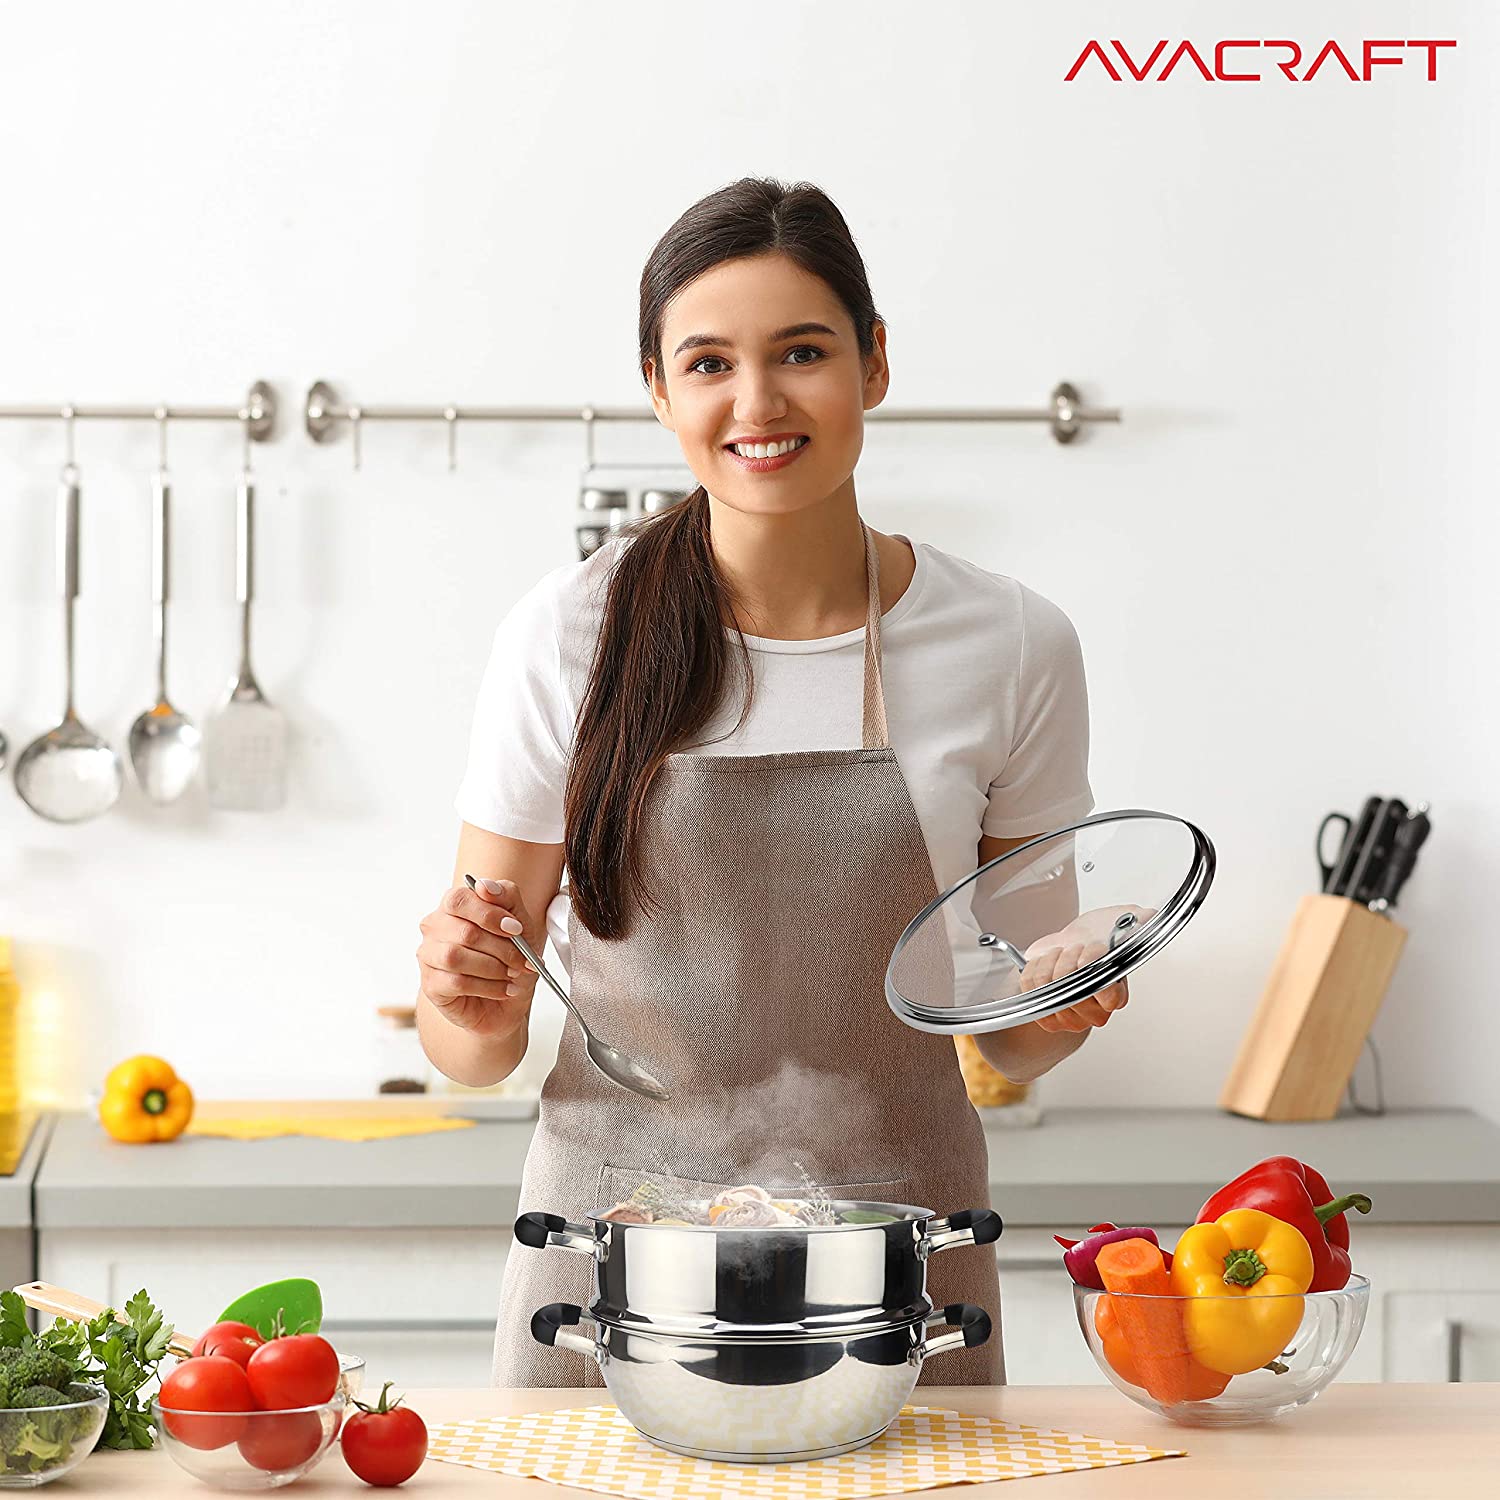 AVACRAFT 18/10 Stainless Steel Cookware Set, Premium Pots and Pans Set,  Kitchen Essentials for cooking, Multi-Ply Body Stainless Steel Pan Set